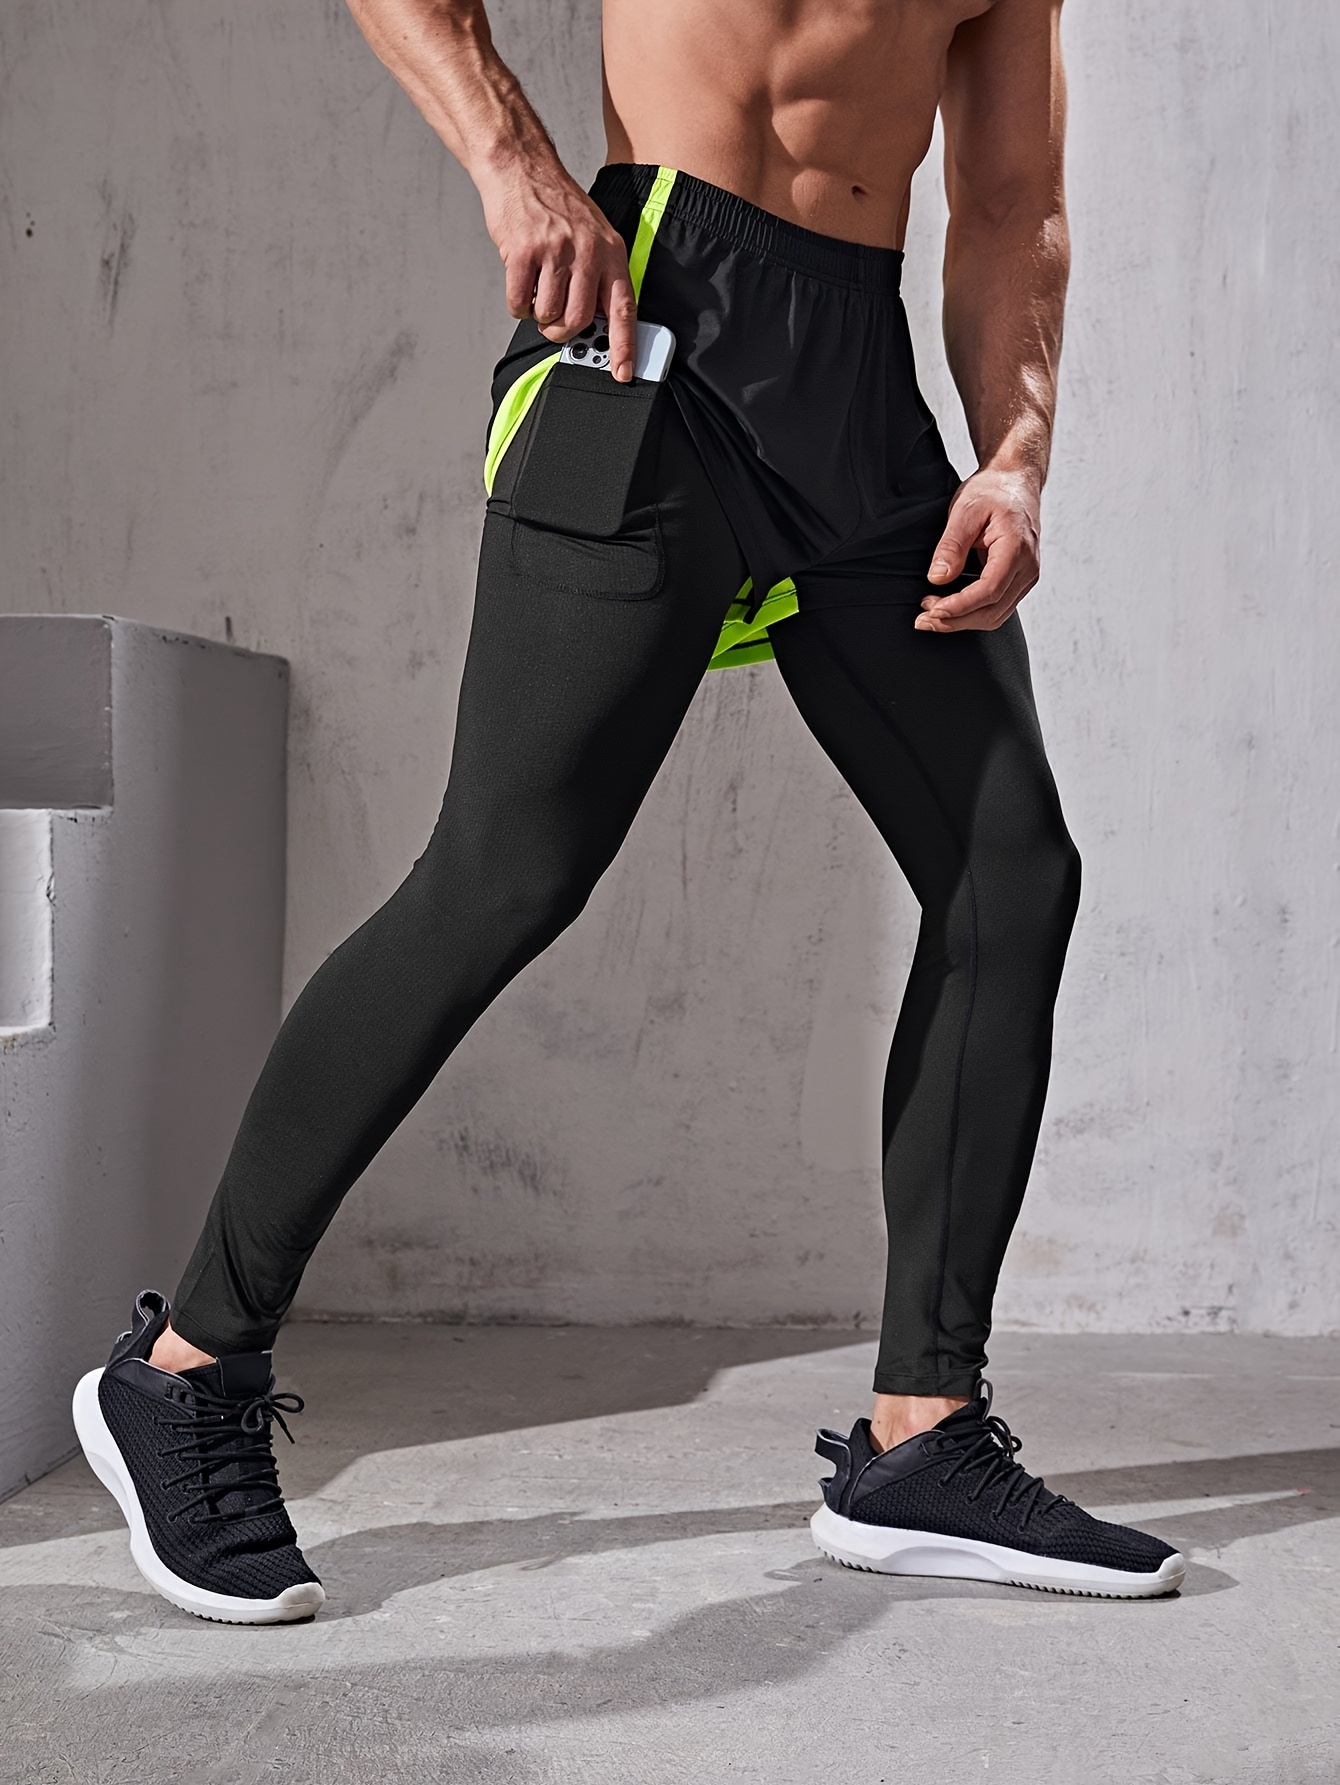 Men's 2 In 1 Running Shorts Quick Dry Athletic Shorts With Liner Leggings,  Lightweight Workout Training Shorts